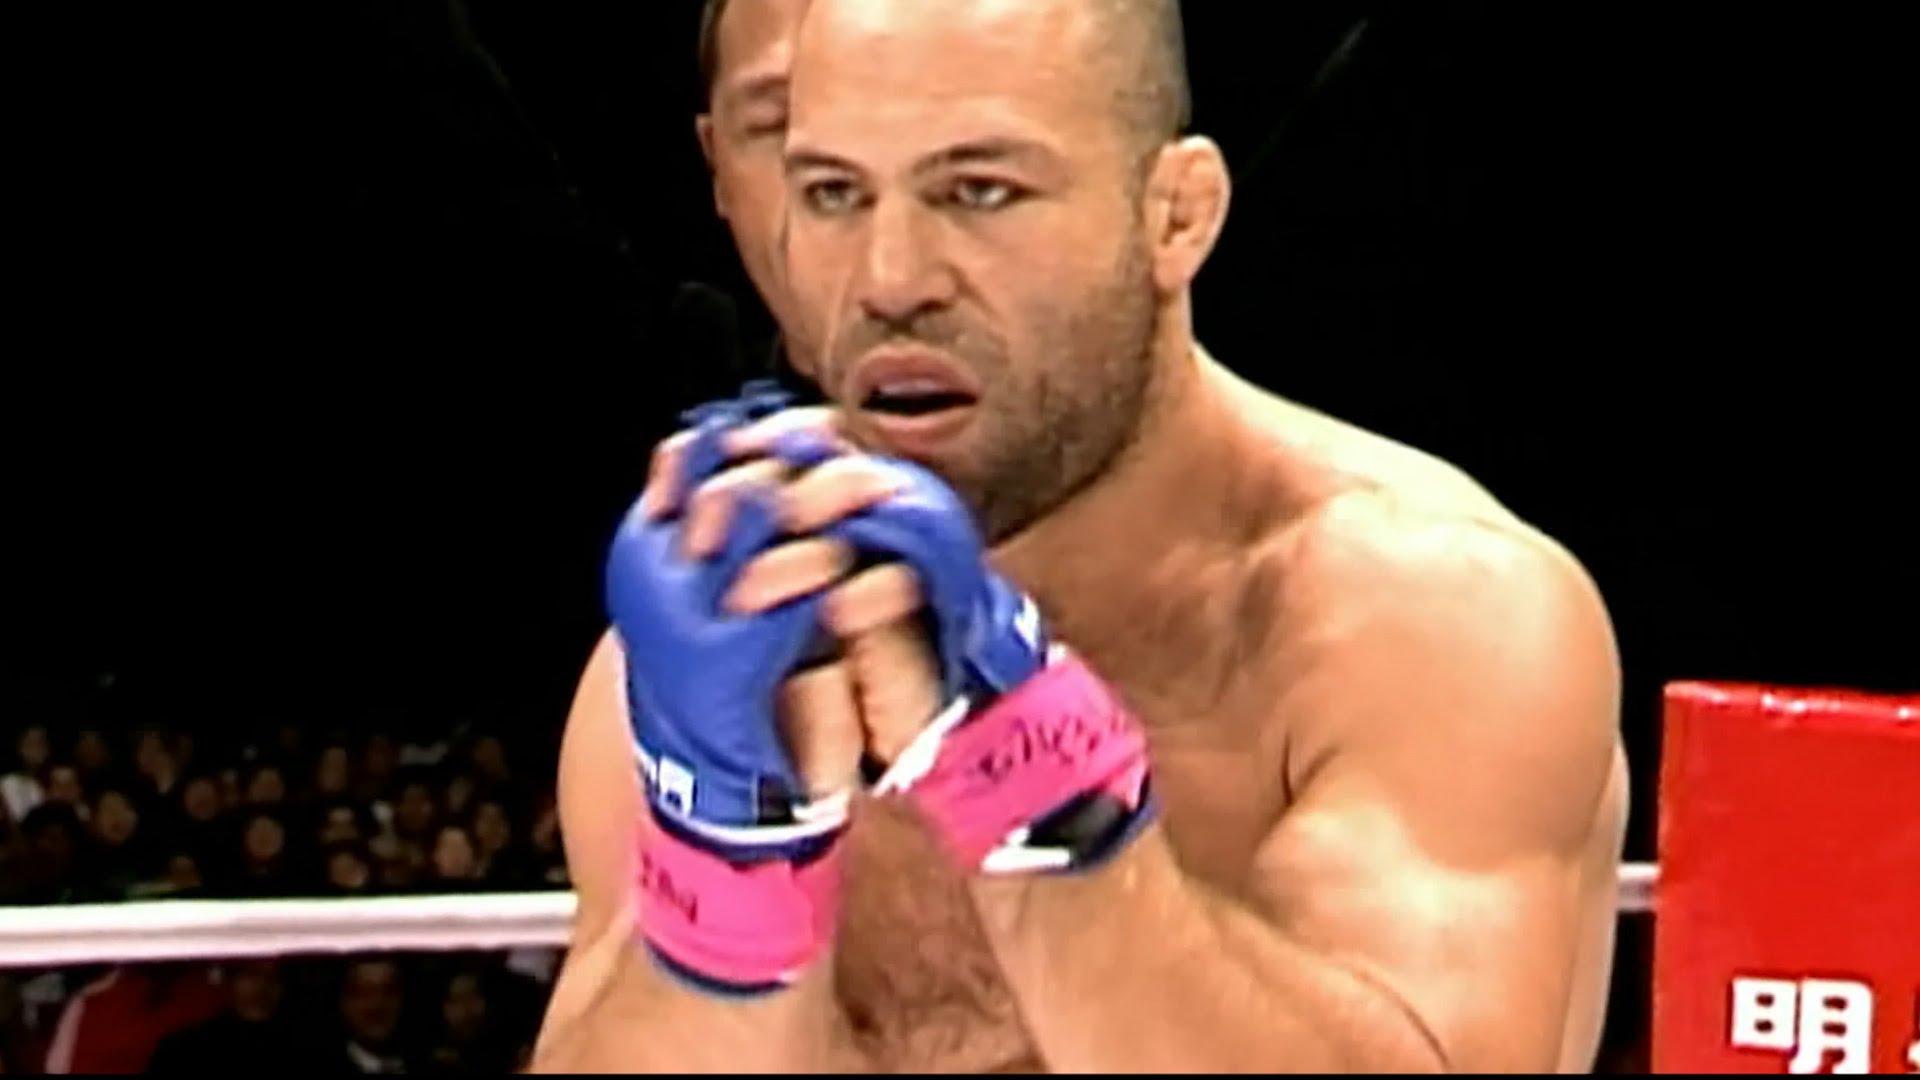 Happy 39th birthday to the one and only Wanderlei Silva! Congratulations 